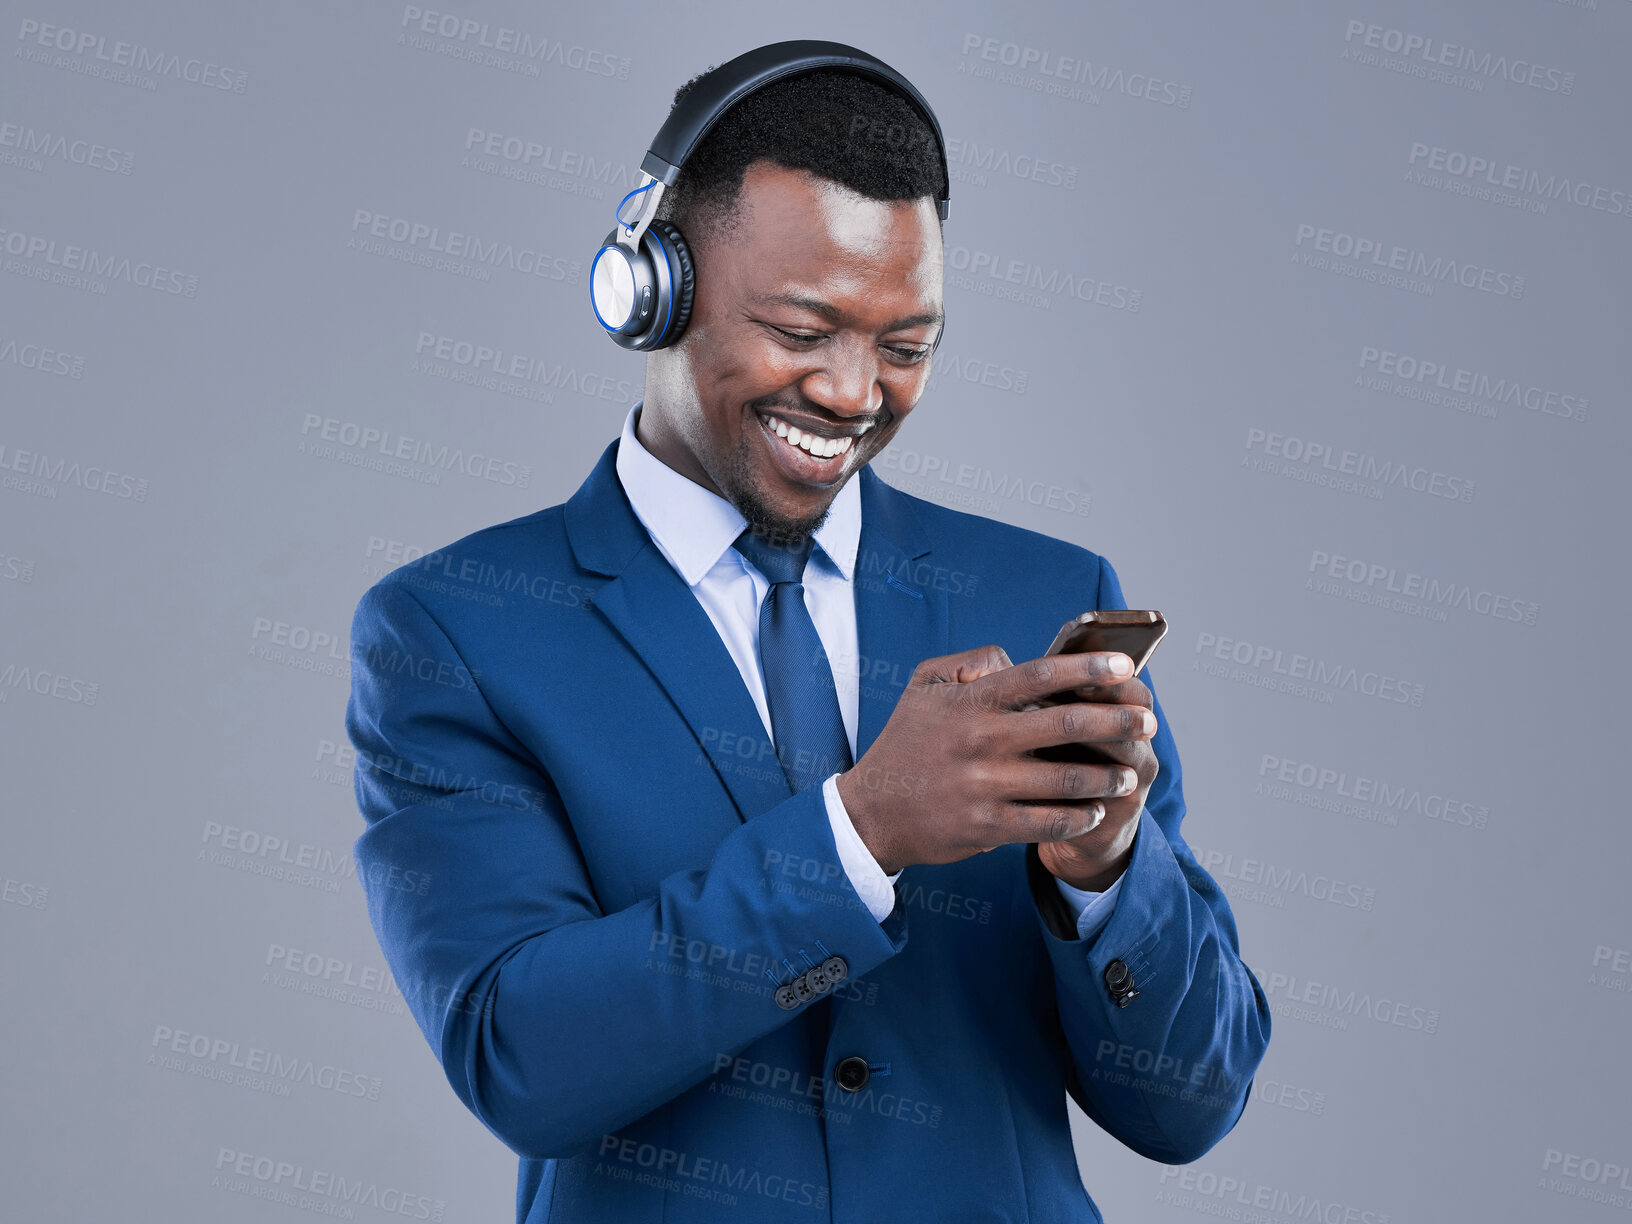 Buy stock photo Cropped shot of a handsome young businessman using his cellphone to listen to music in studio against a grey background